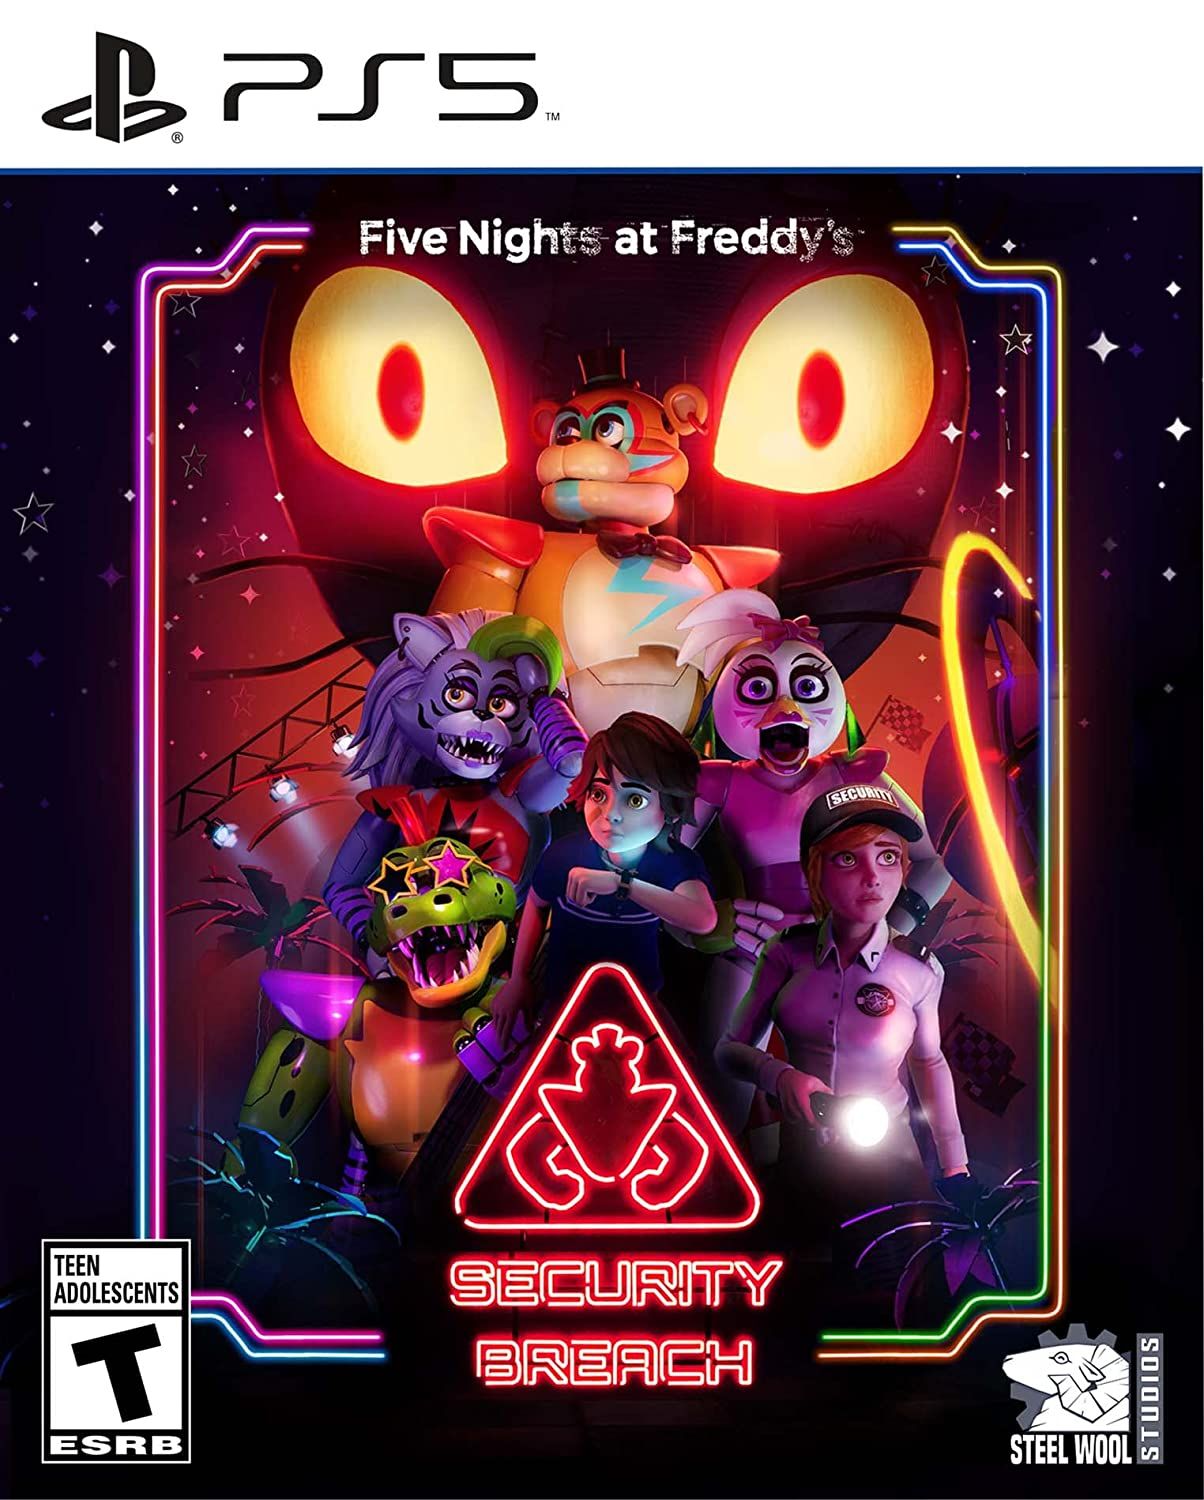 Five Nights at Freddy's Security Breach PS5 case.